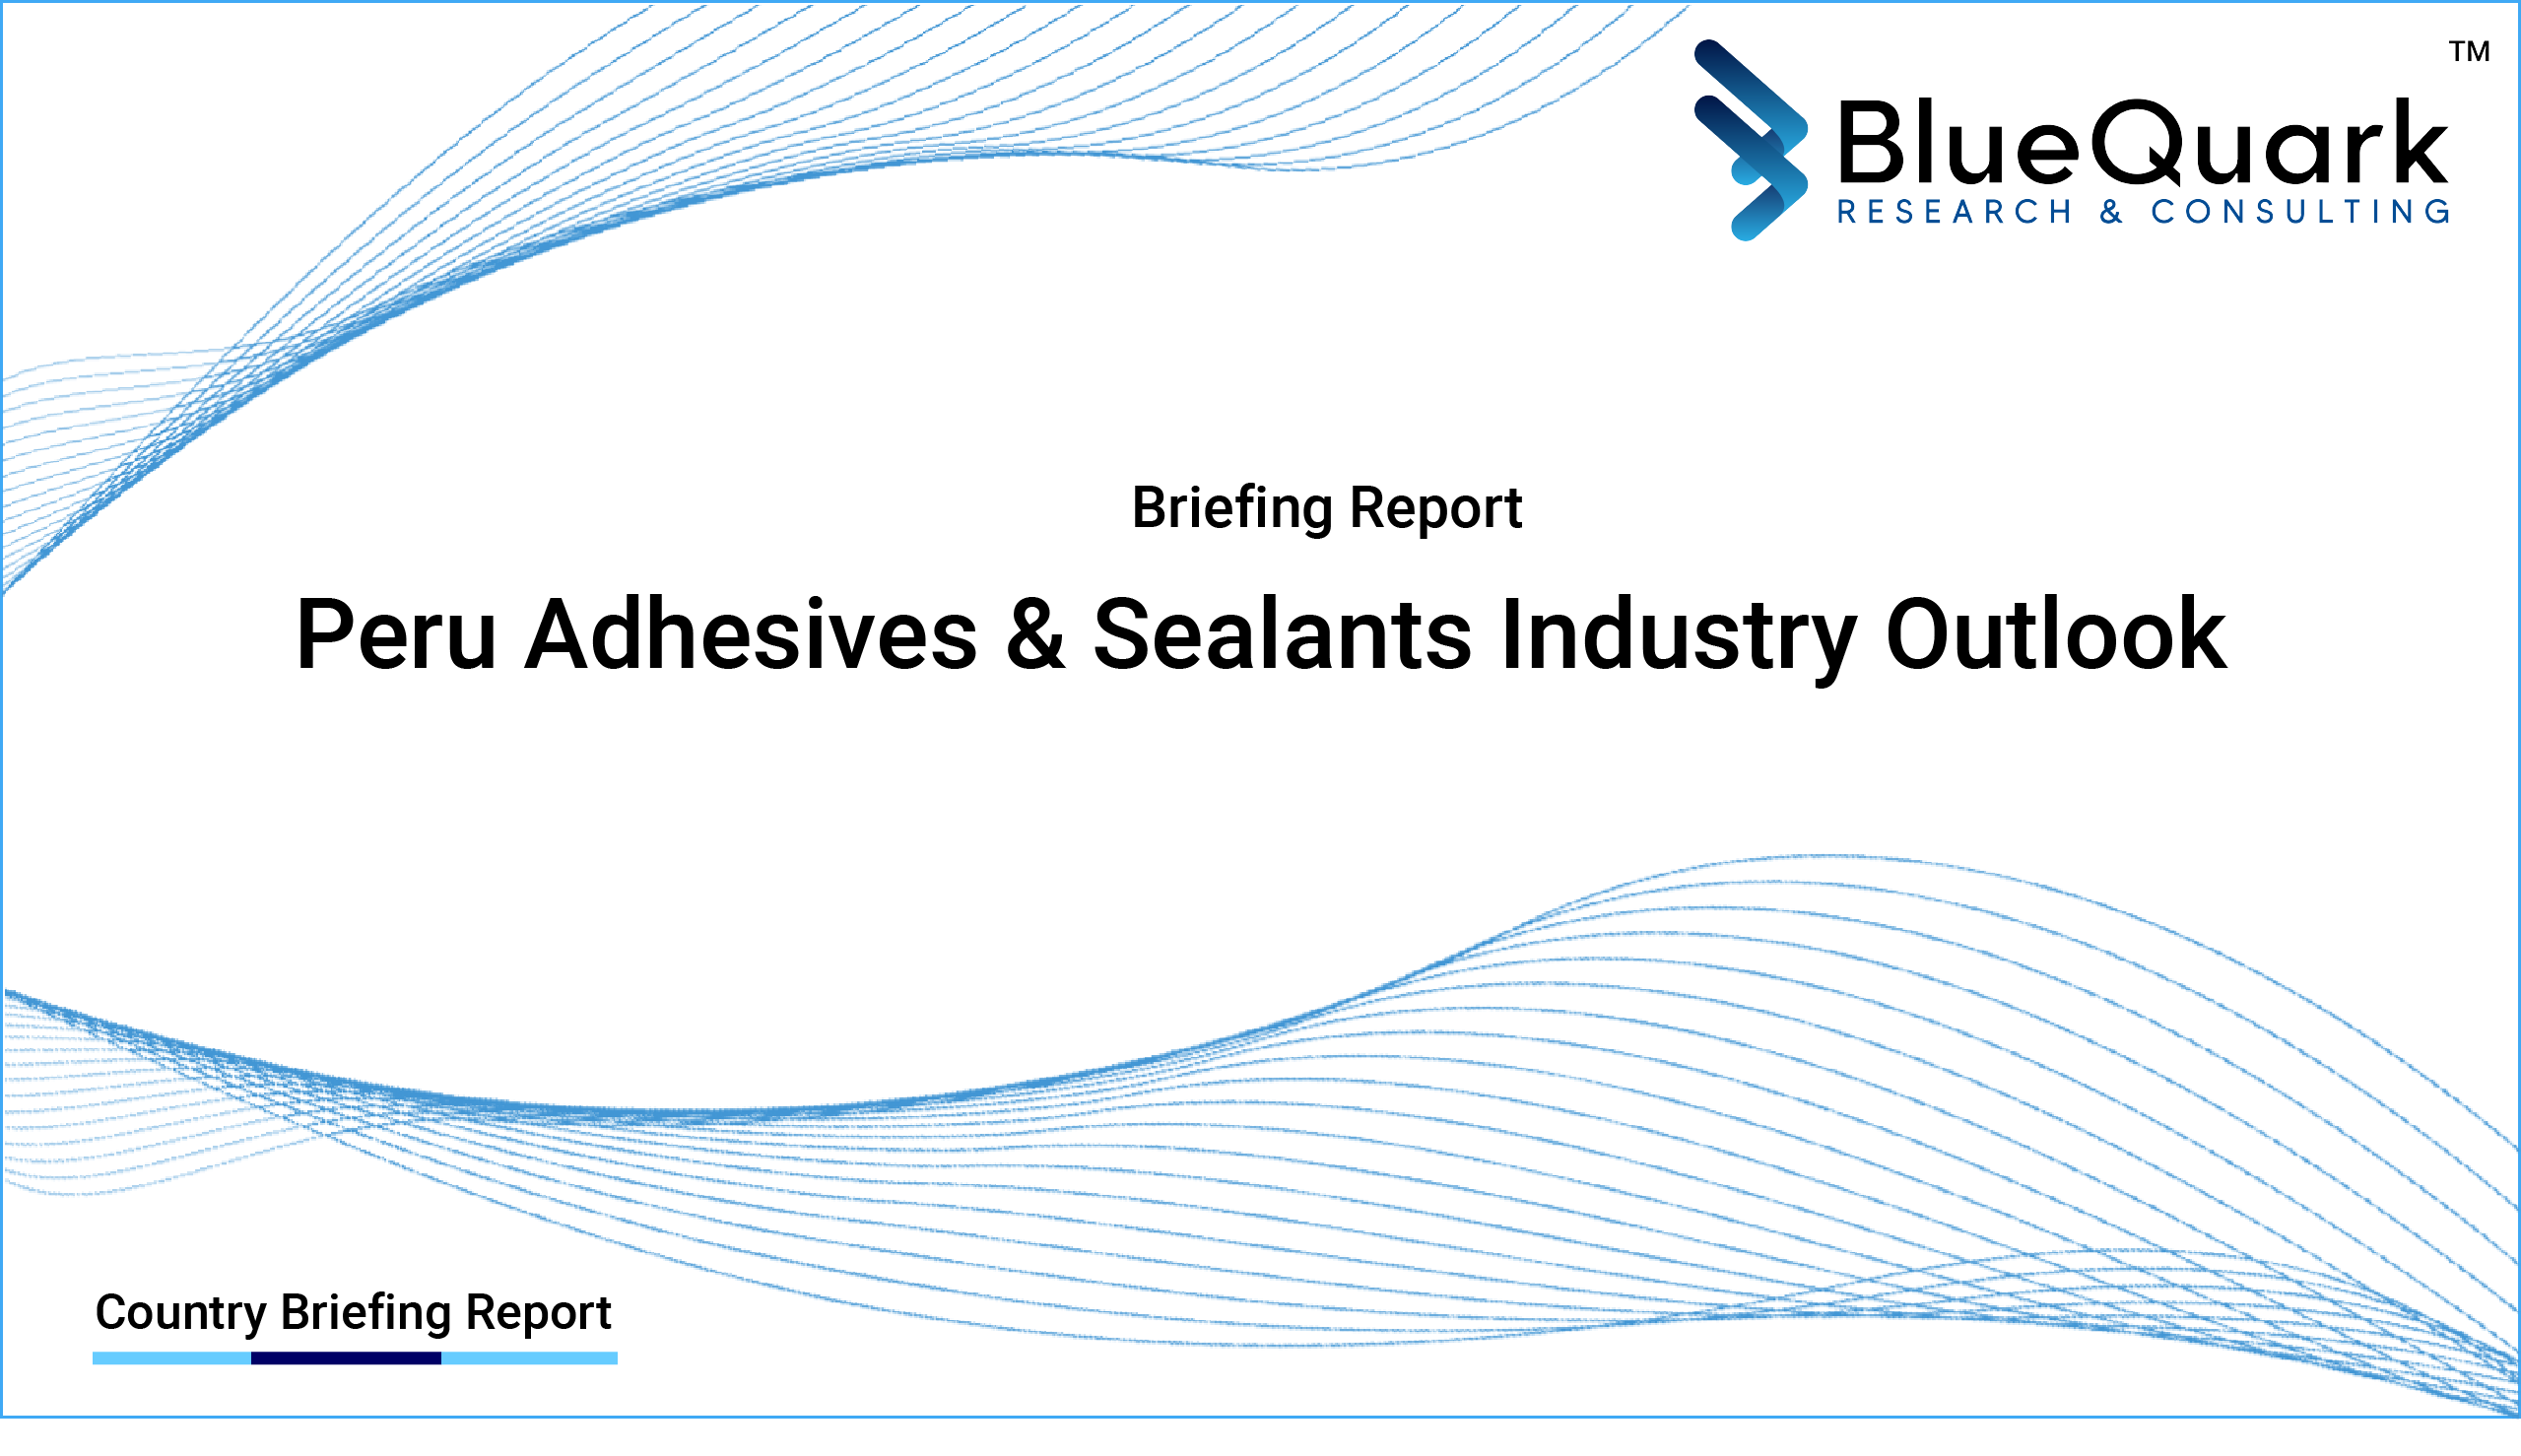 Brief Report on Adhesives & Sealants Industry Outlook in Peru from 2017 to 2029 - Market Size, Drivers, Restraints, Trade, and Key Company Profiles